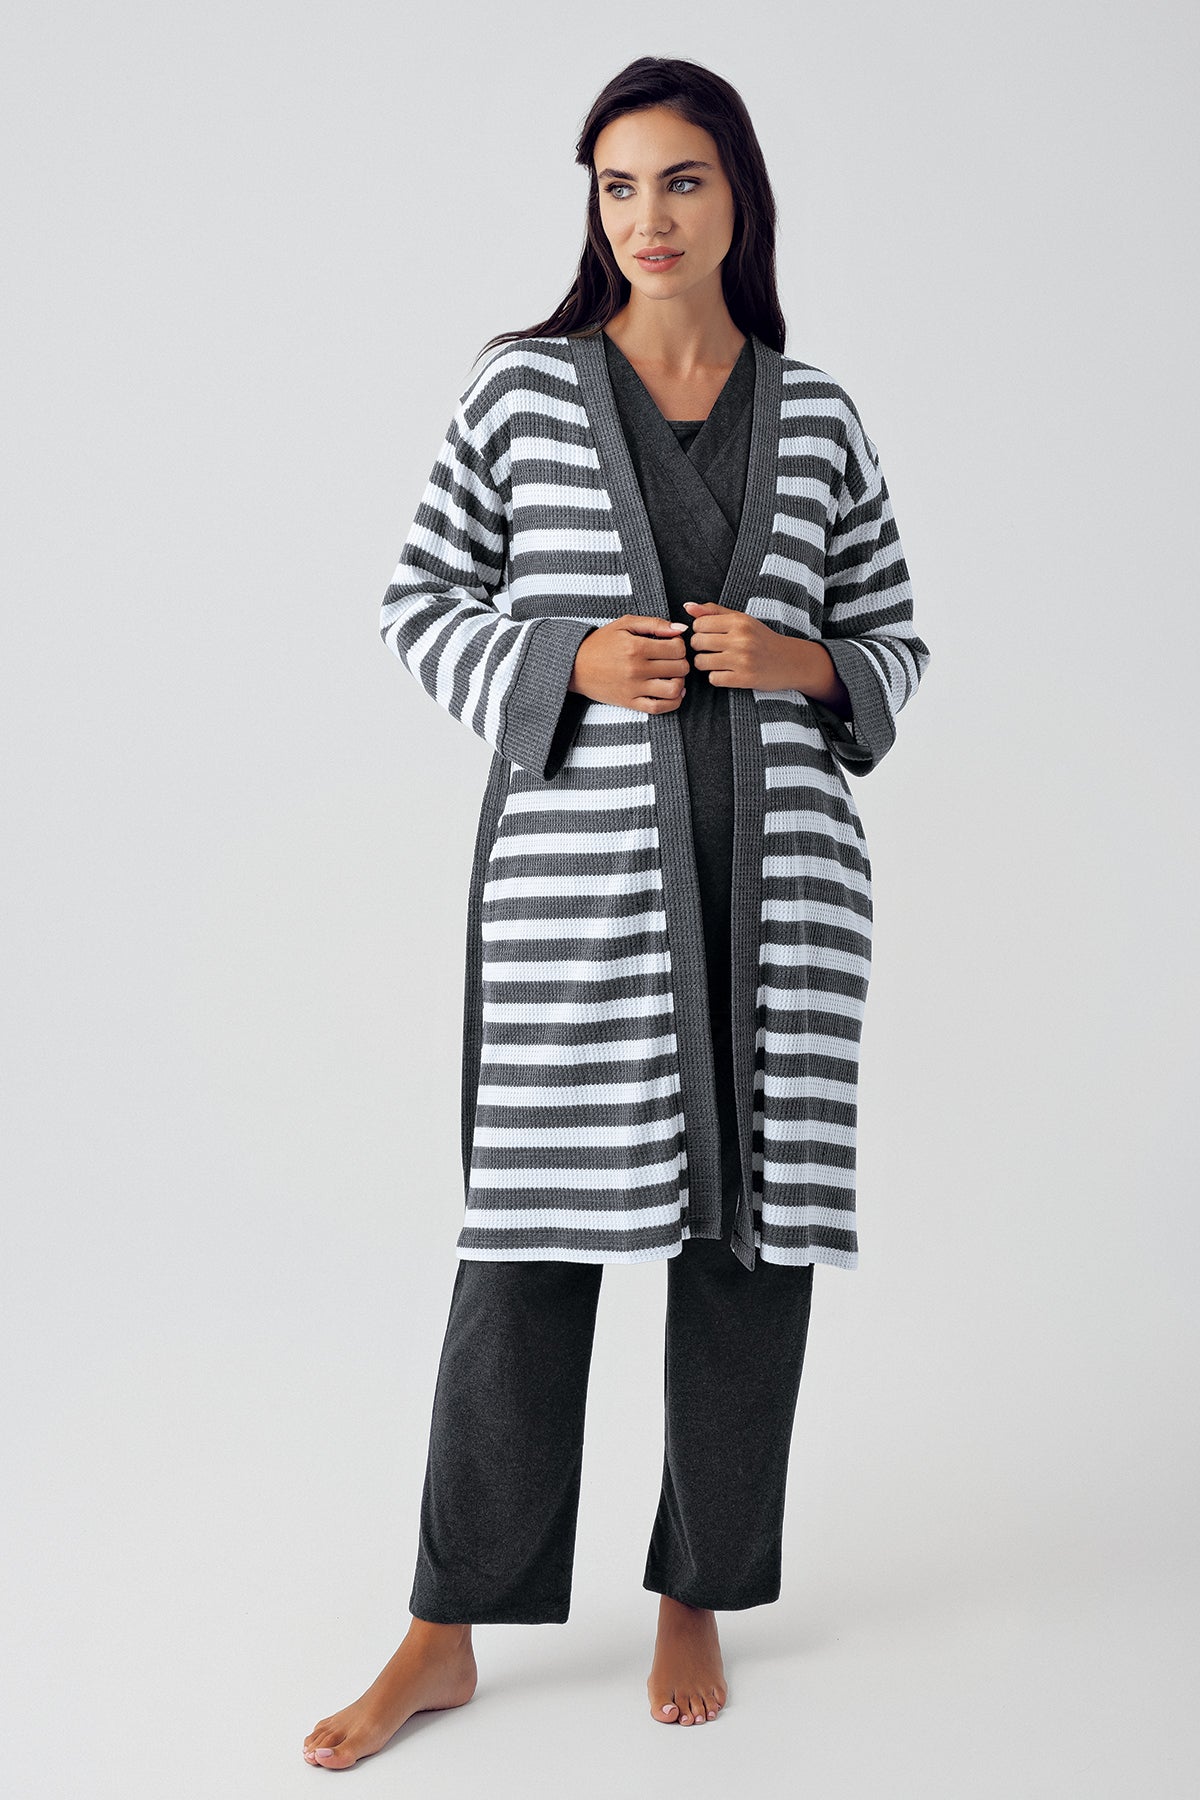 Shopymommy 15301 Double Breasted 3-Pieces Maternity & Nursing Pajamas With Knitwear Robe Anthracite